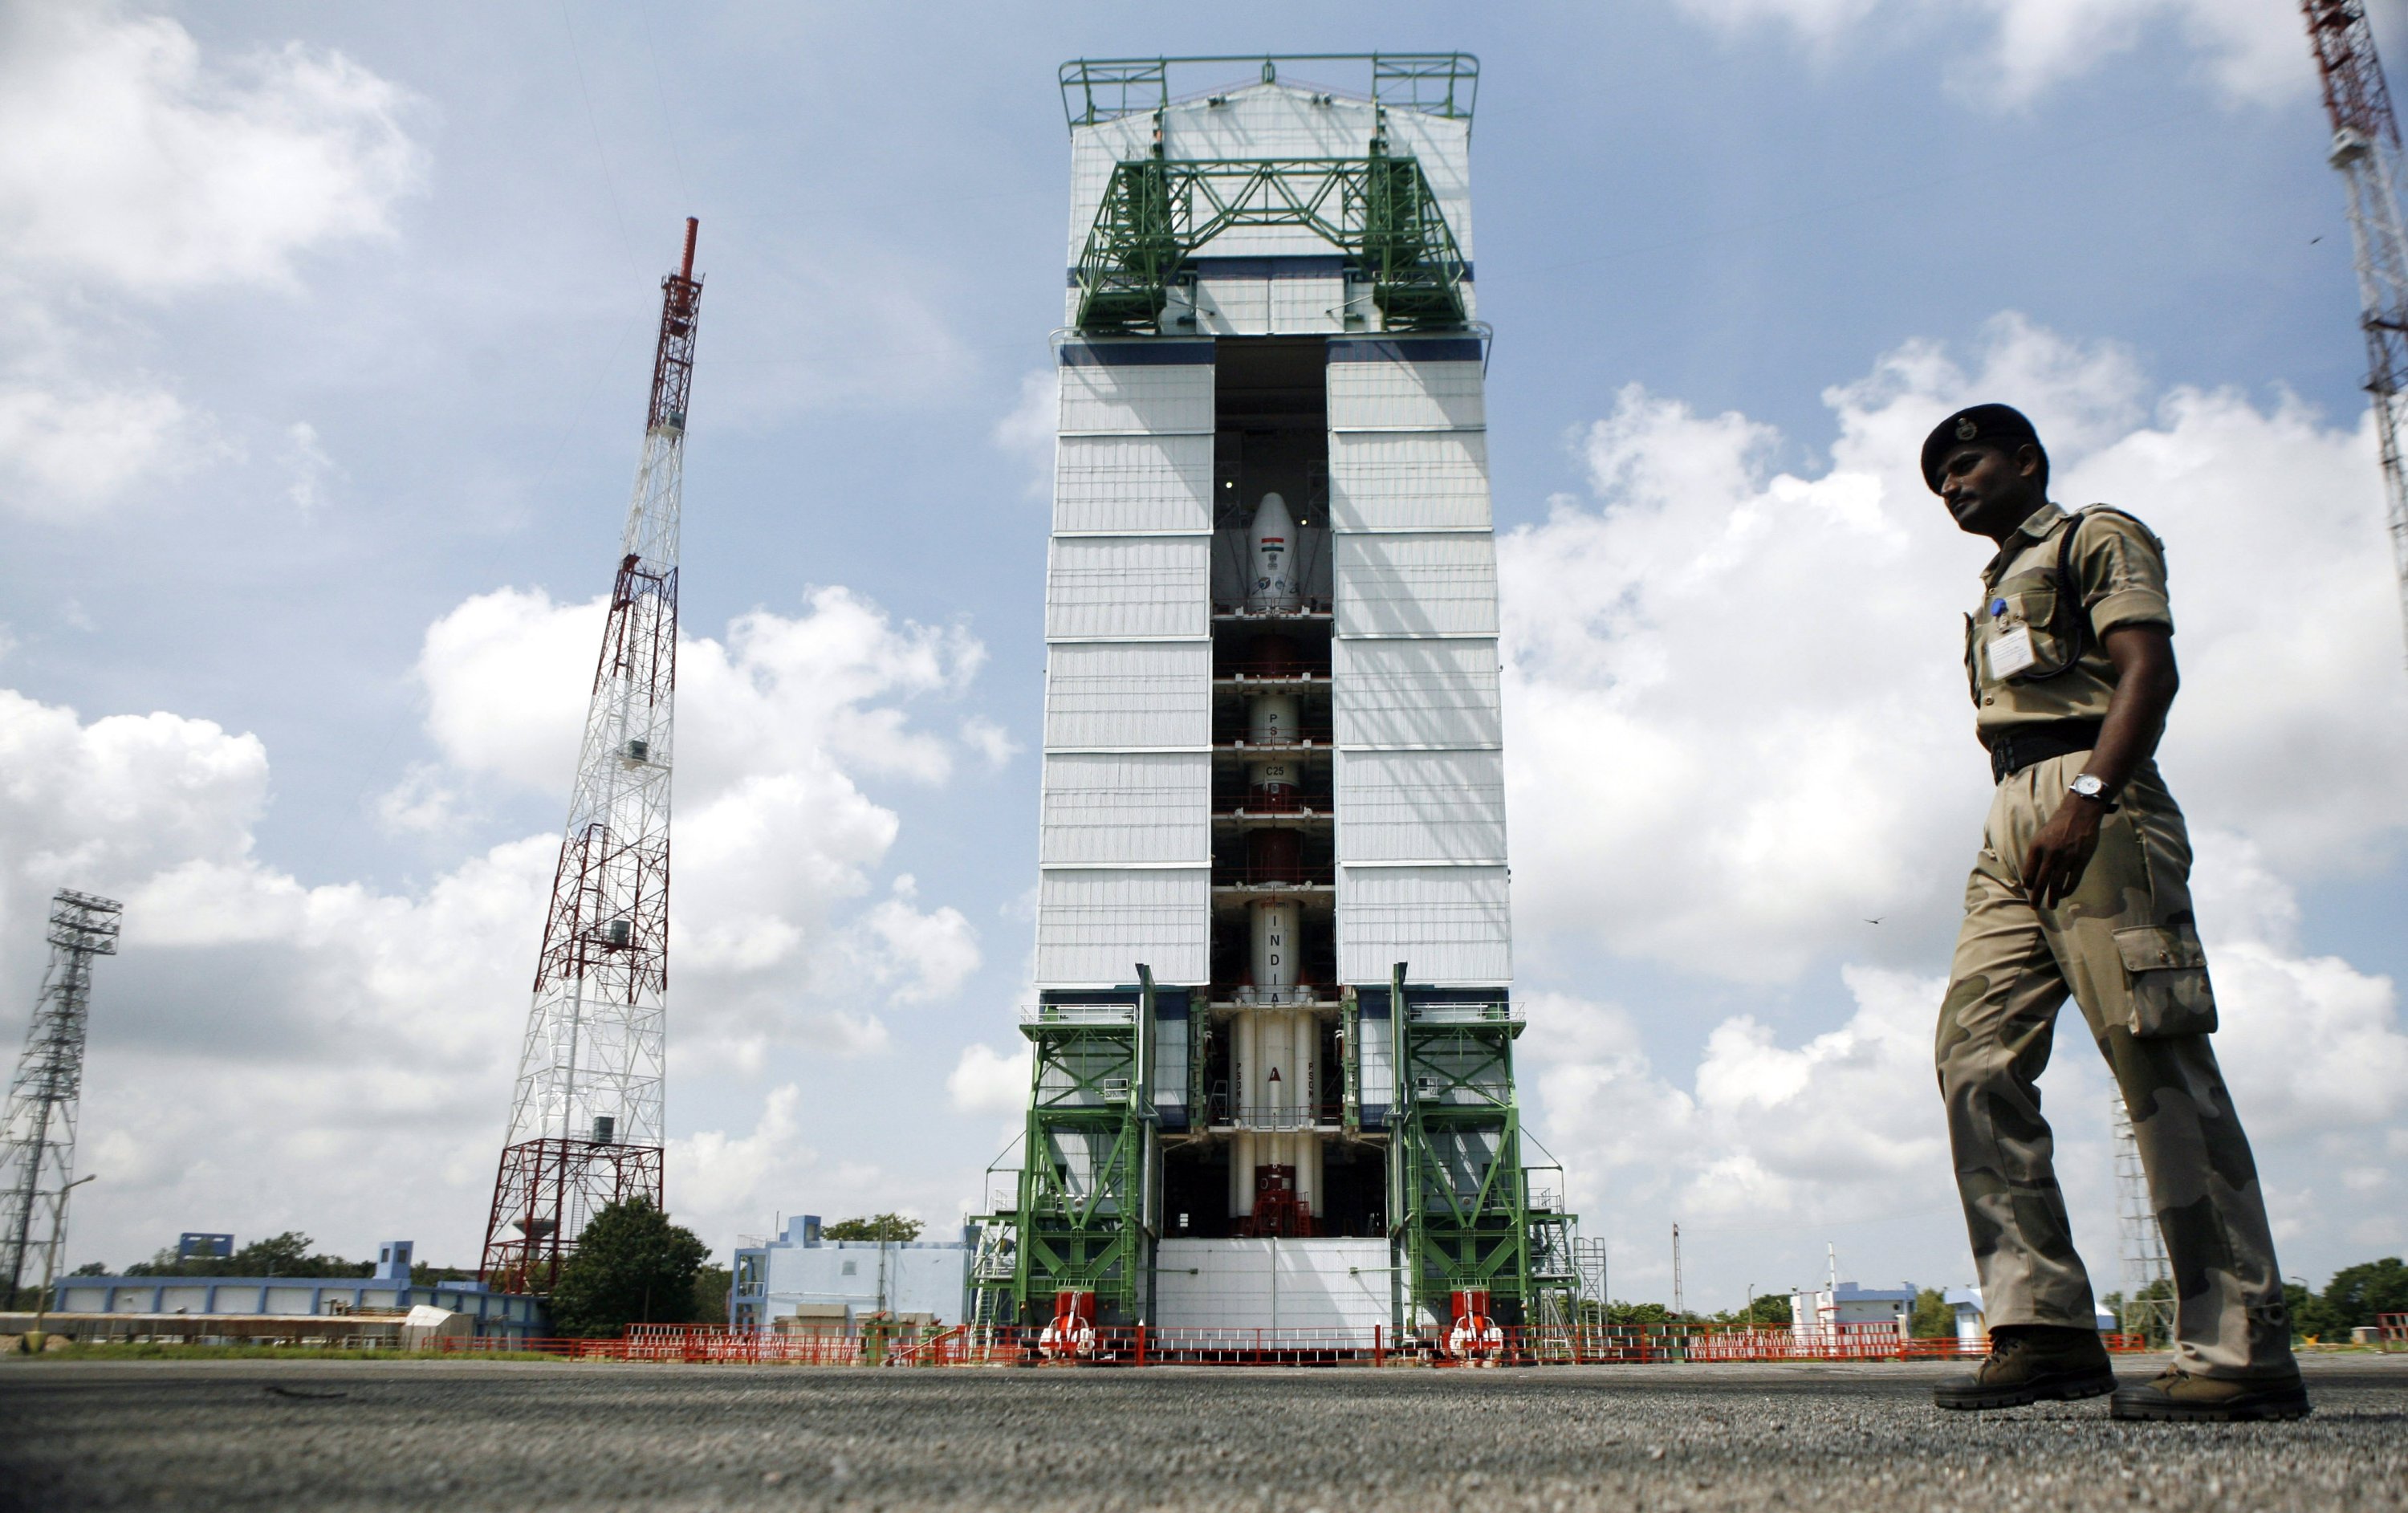 A paramilitary soldier walks past the Polar Satellite Launch Vehicle (PSLV-C25) at the Satish Dhawan Space Center at Sriharikota, in the southern Indian state of Andhra Pradesh, Wednesday, Oct. 30, 2013. (AP Photo)